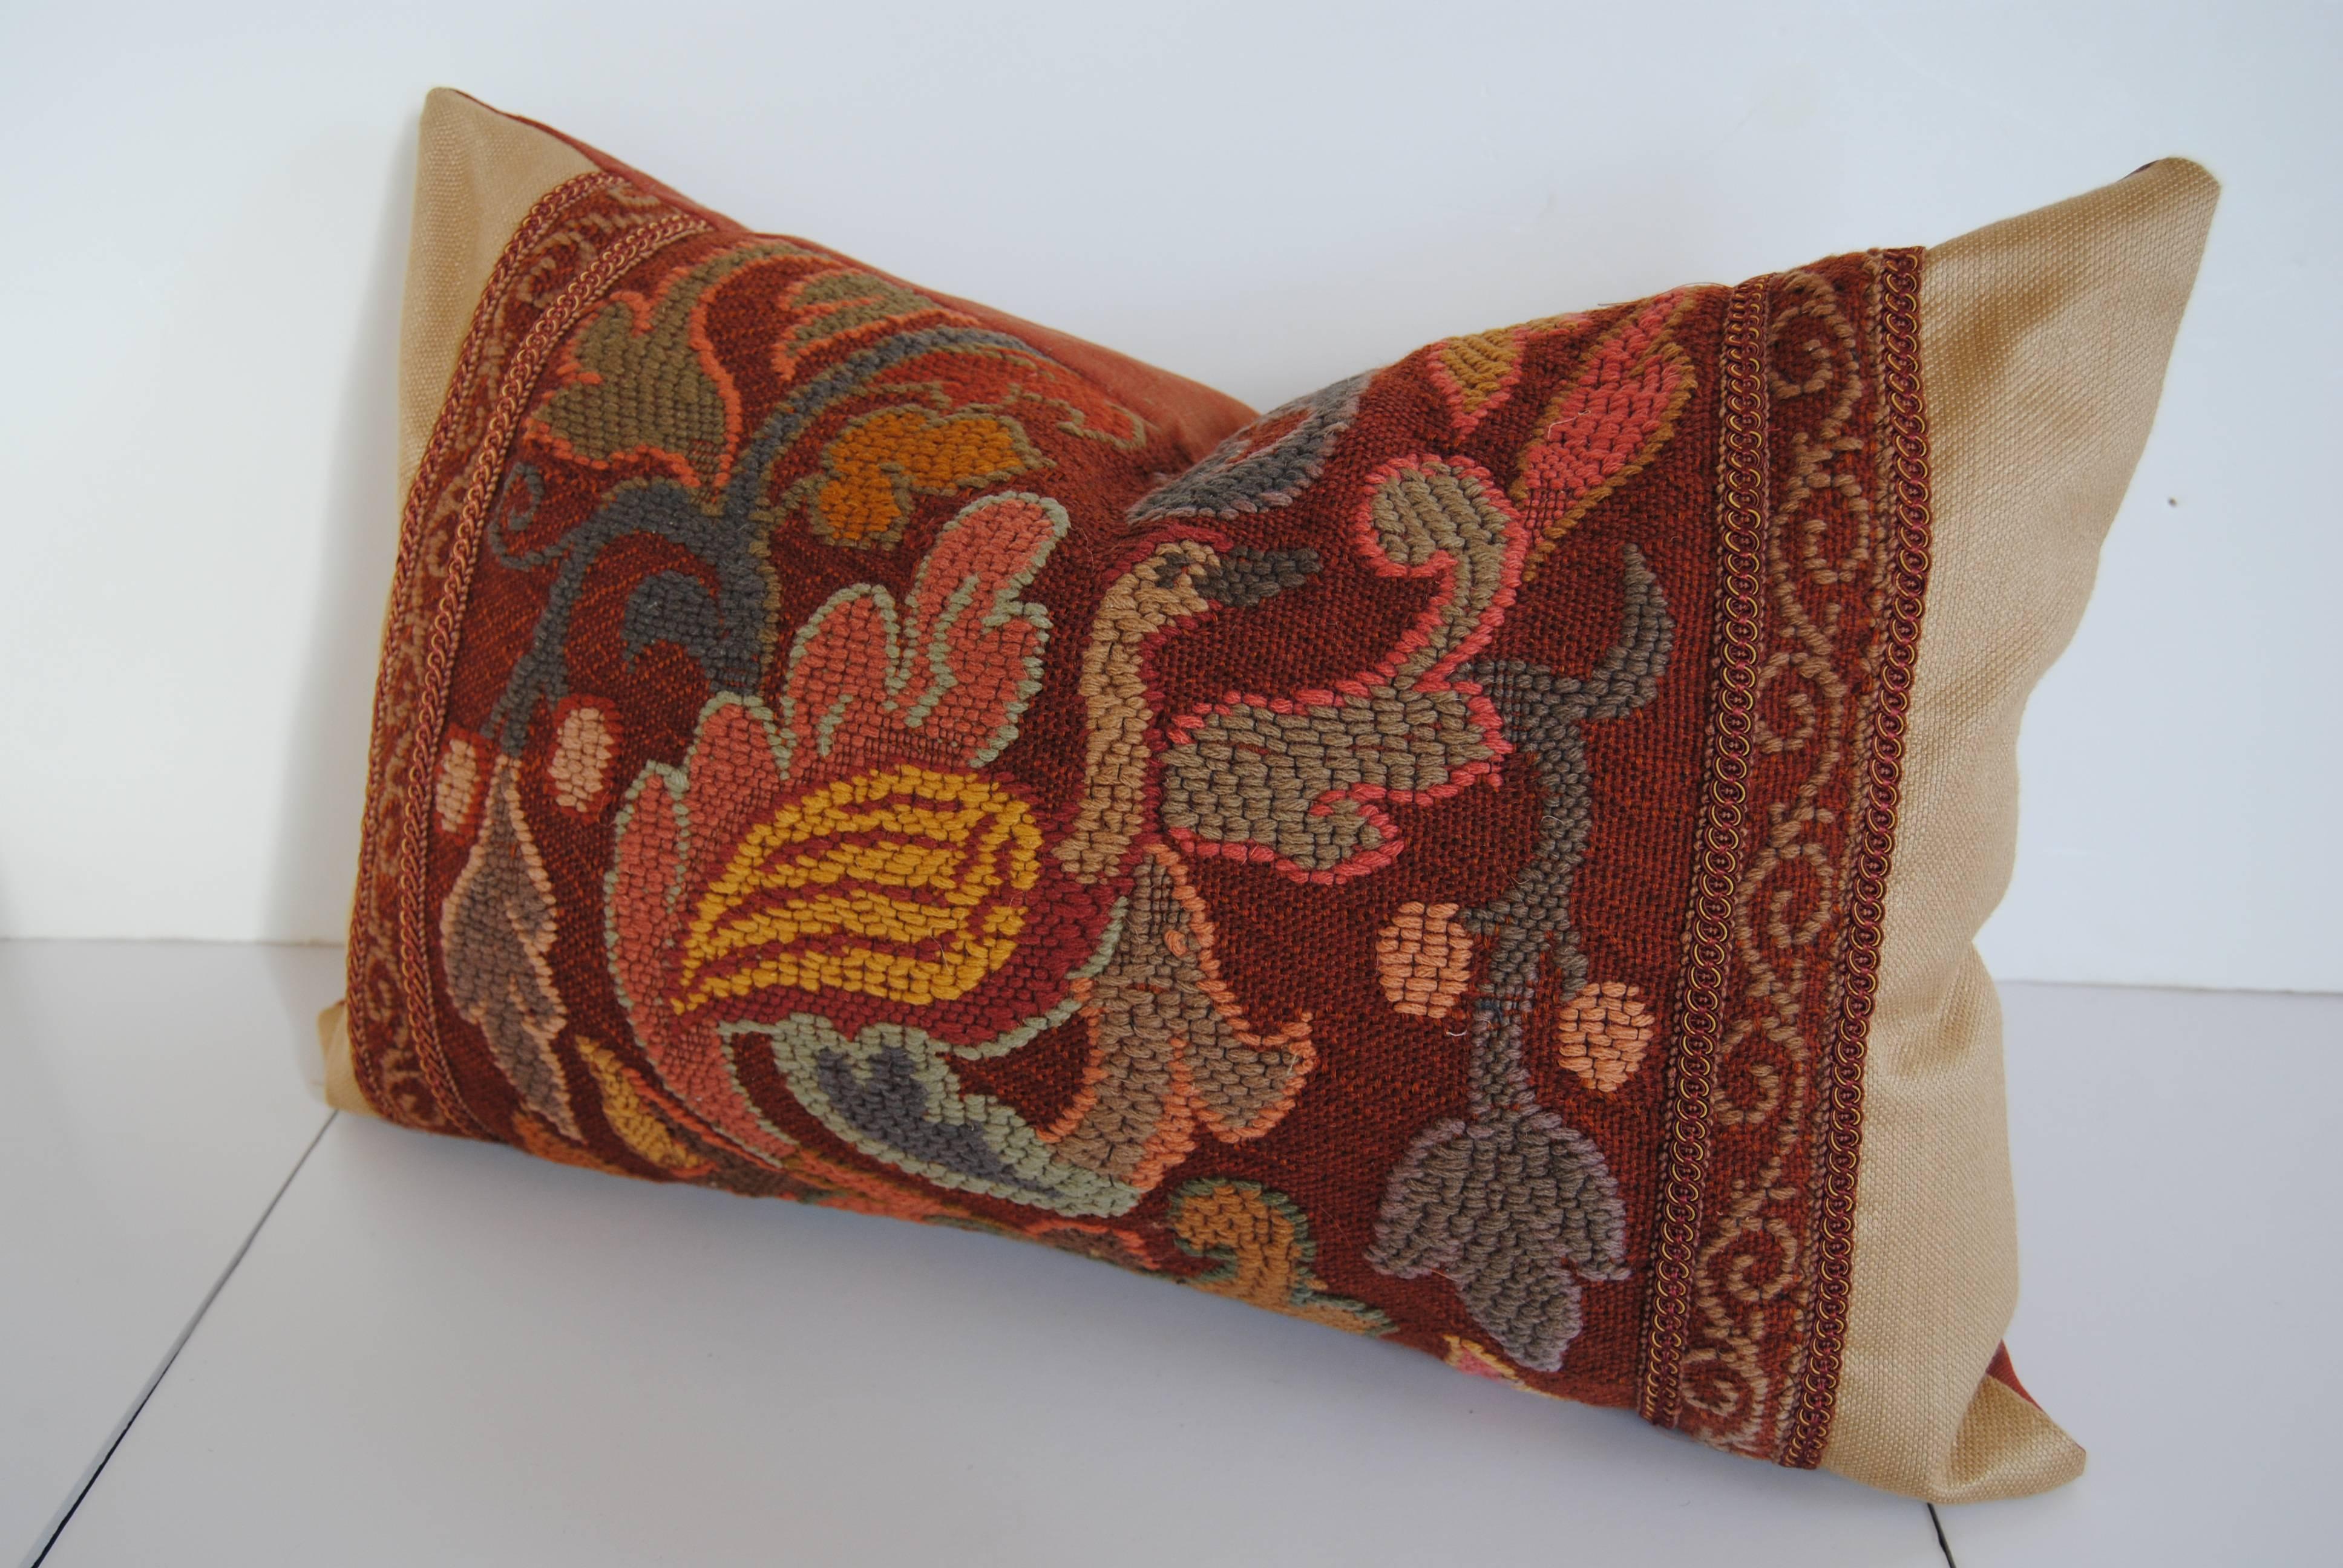 Custom pillow cut from an antique French hand loomed woolwork tapestry that was made in Paris. The fragment is edged with an imported gimp and faced with cream silk. The pillow is backed in paprika silk, filled with a 100% down insert and hand-sewn